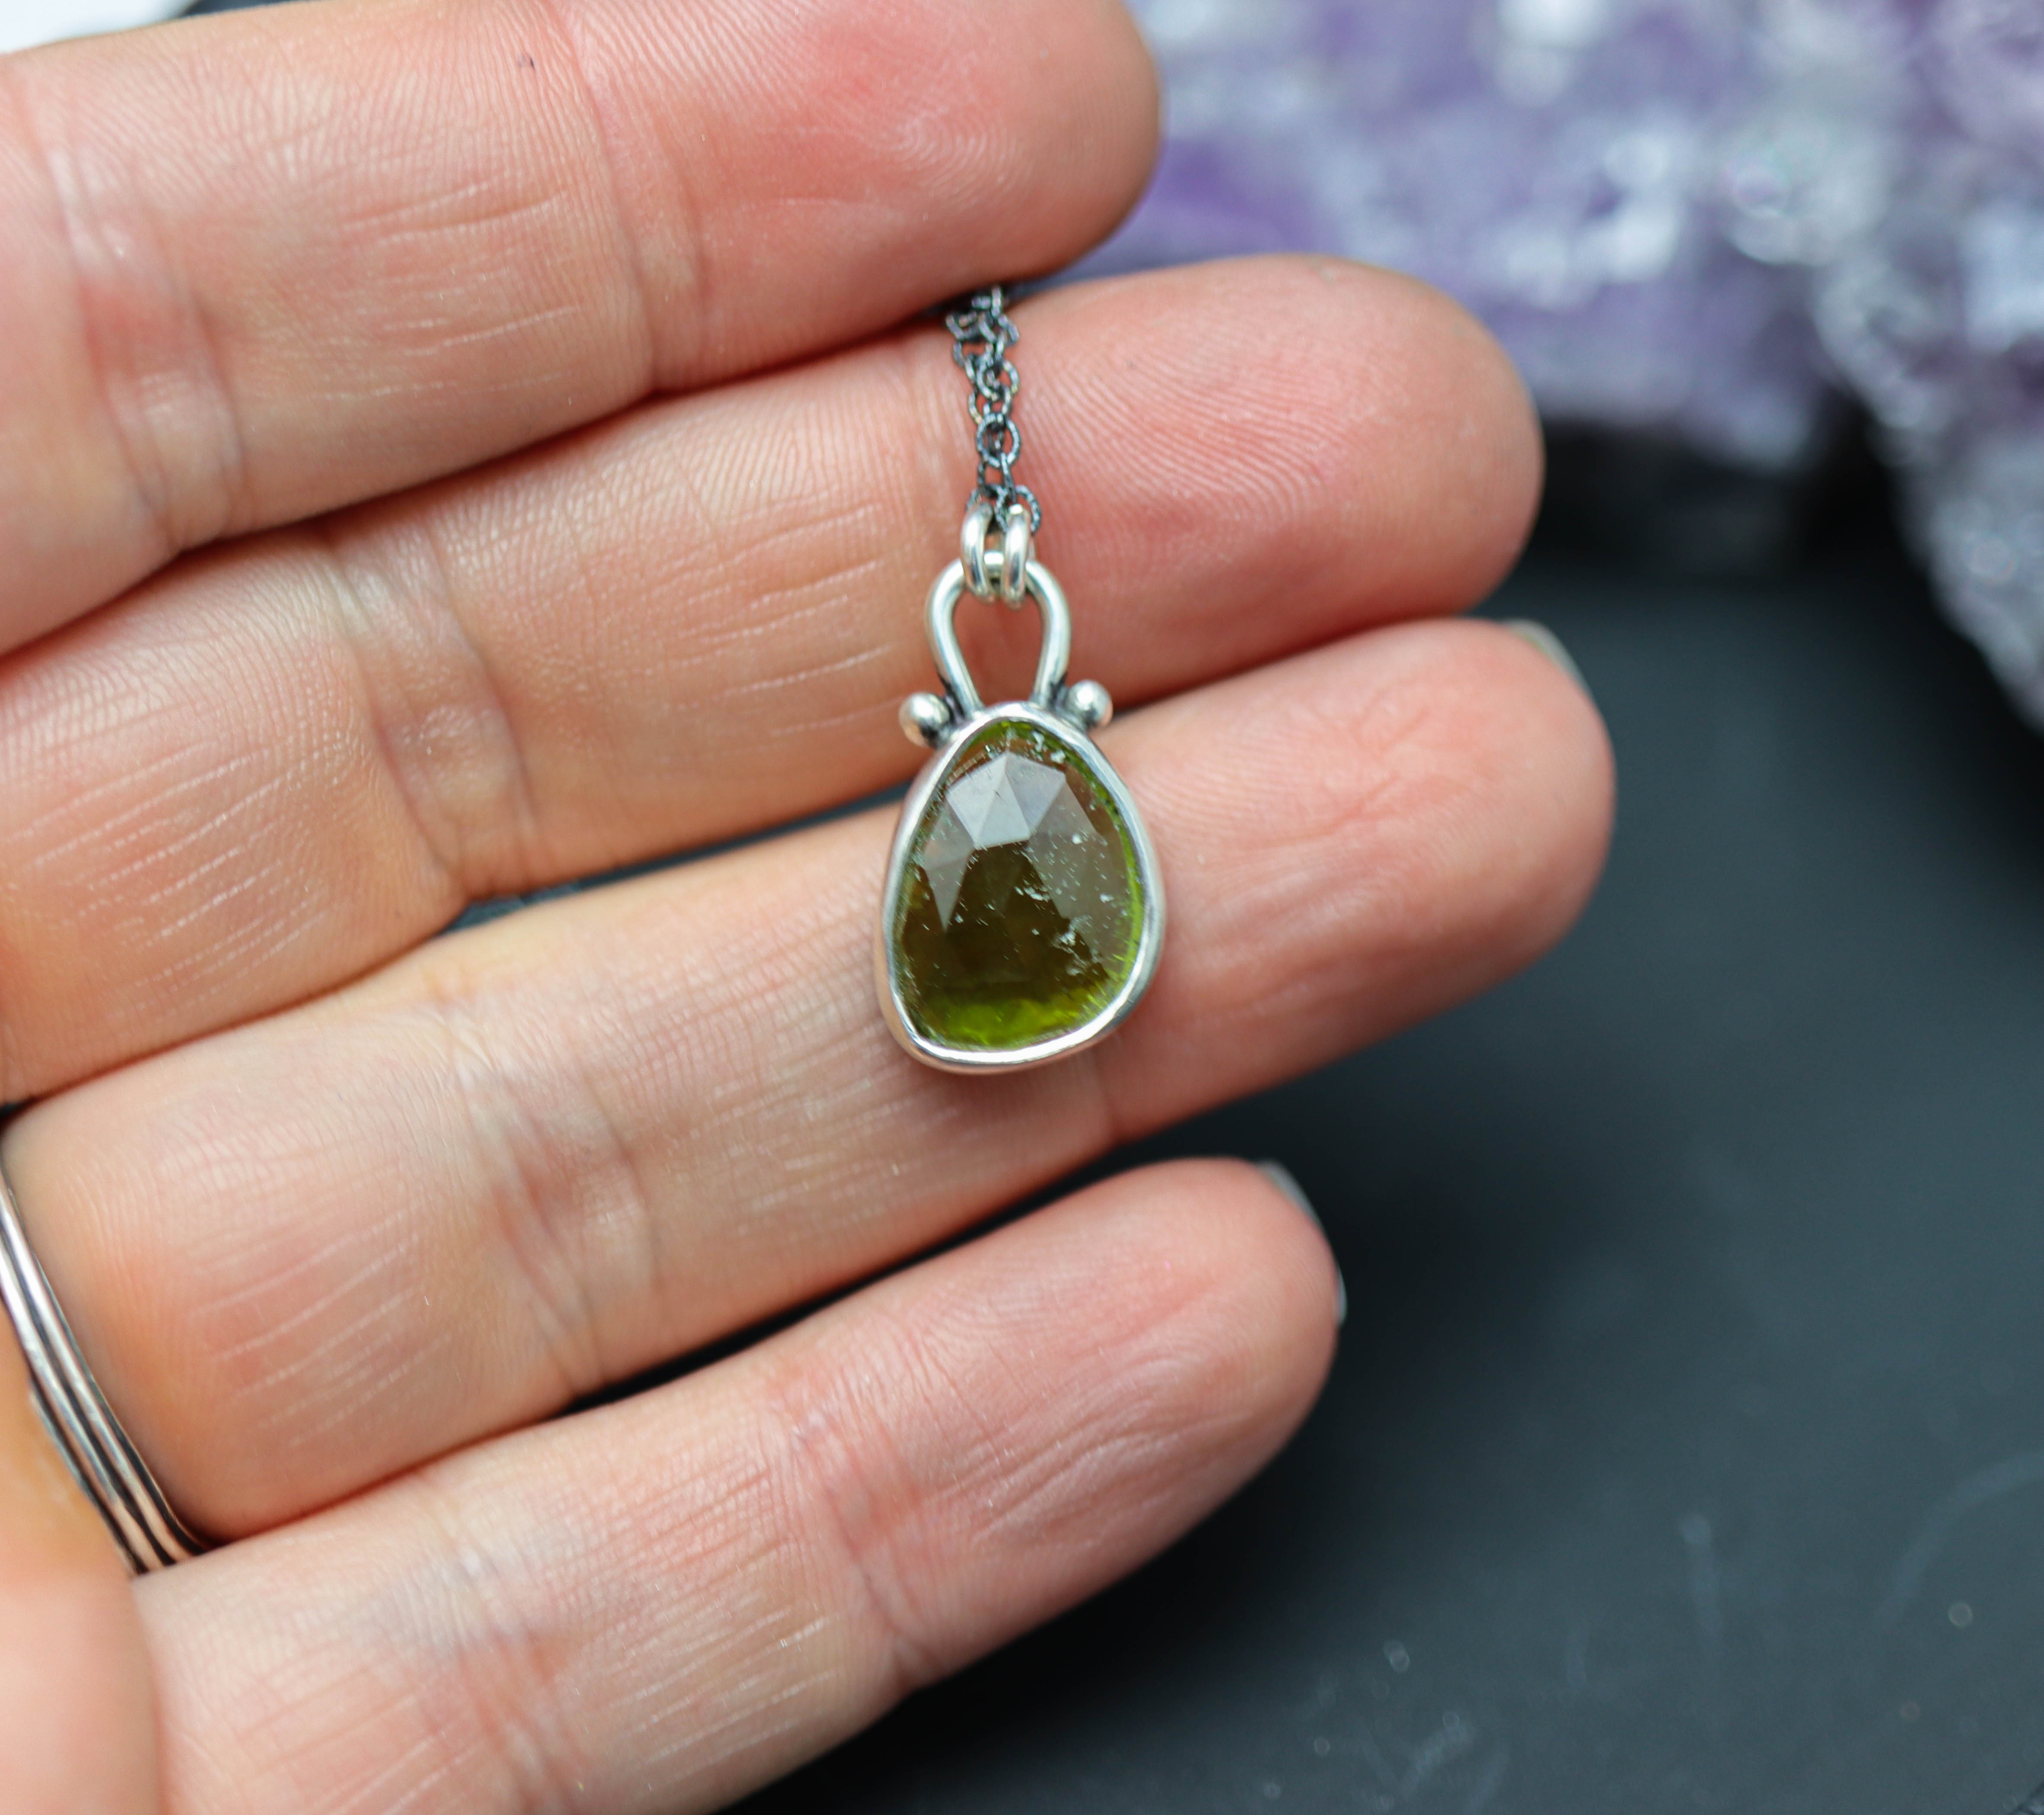 Totally Awesome Green Tourmaline Pendant Necklace Sterling Silver